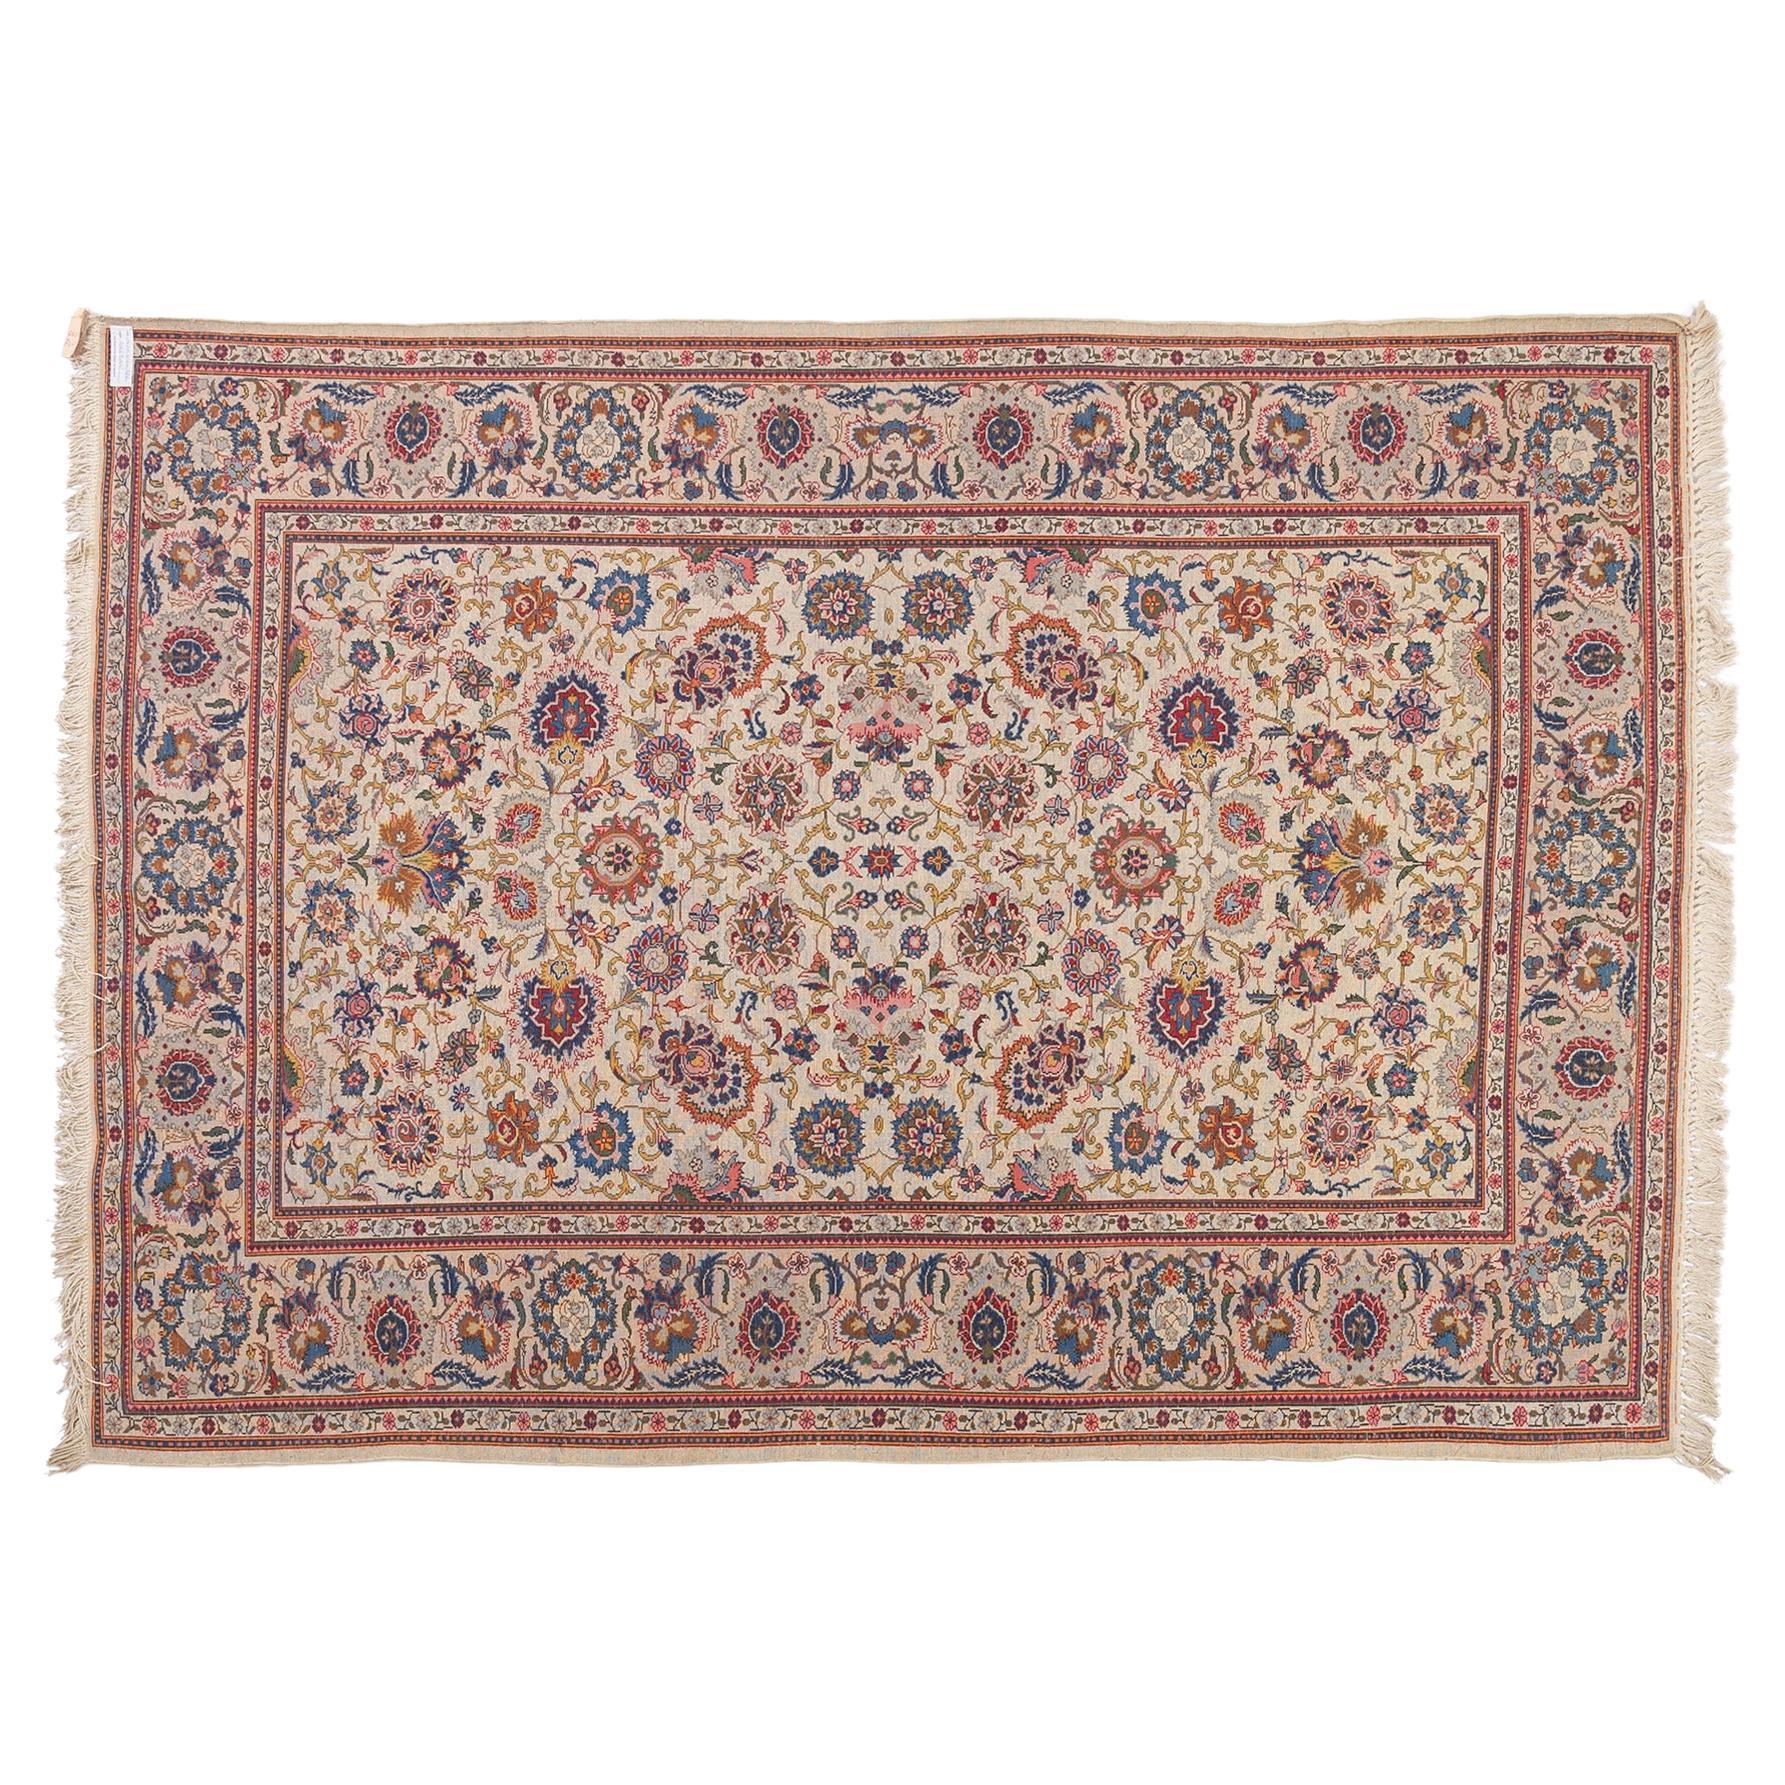 From my private collection: one of the most famous and beautiful oriental carpet, with an innate elegance.
Its floral design is masterfully distributed over the entire surface, with pleasant, non-intrusive pastel colors: perfect on the wall, like a